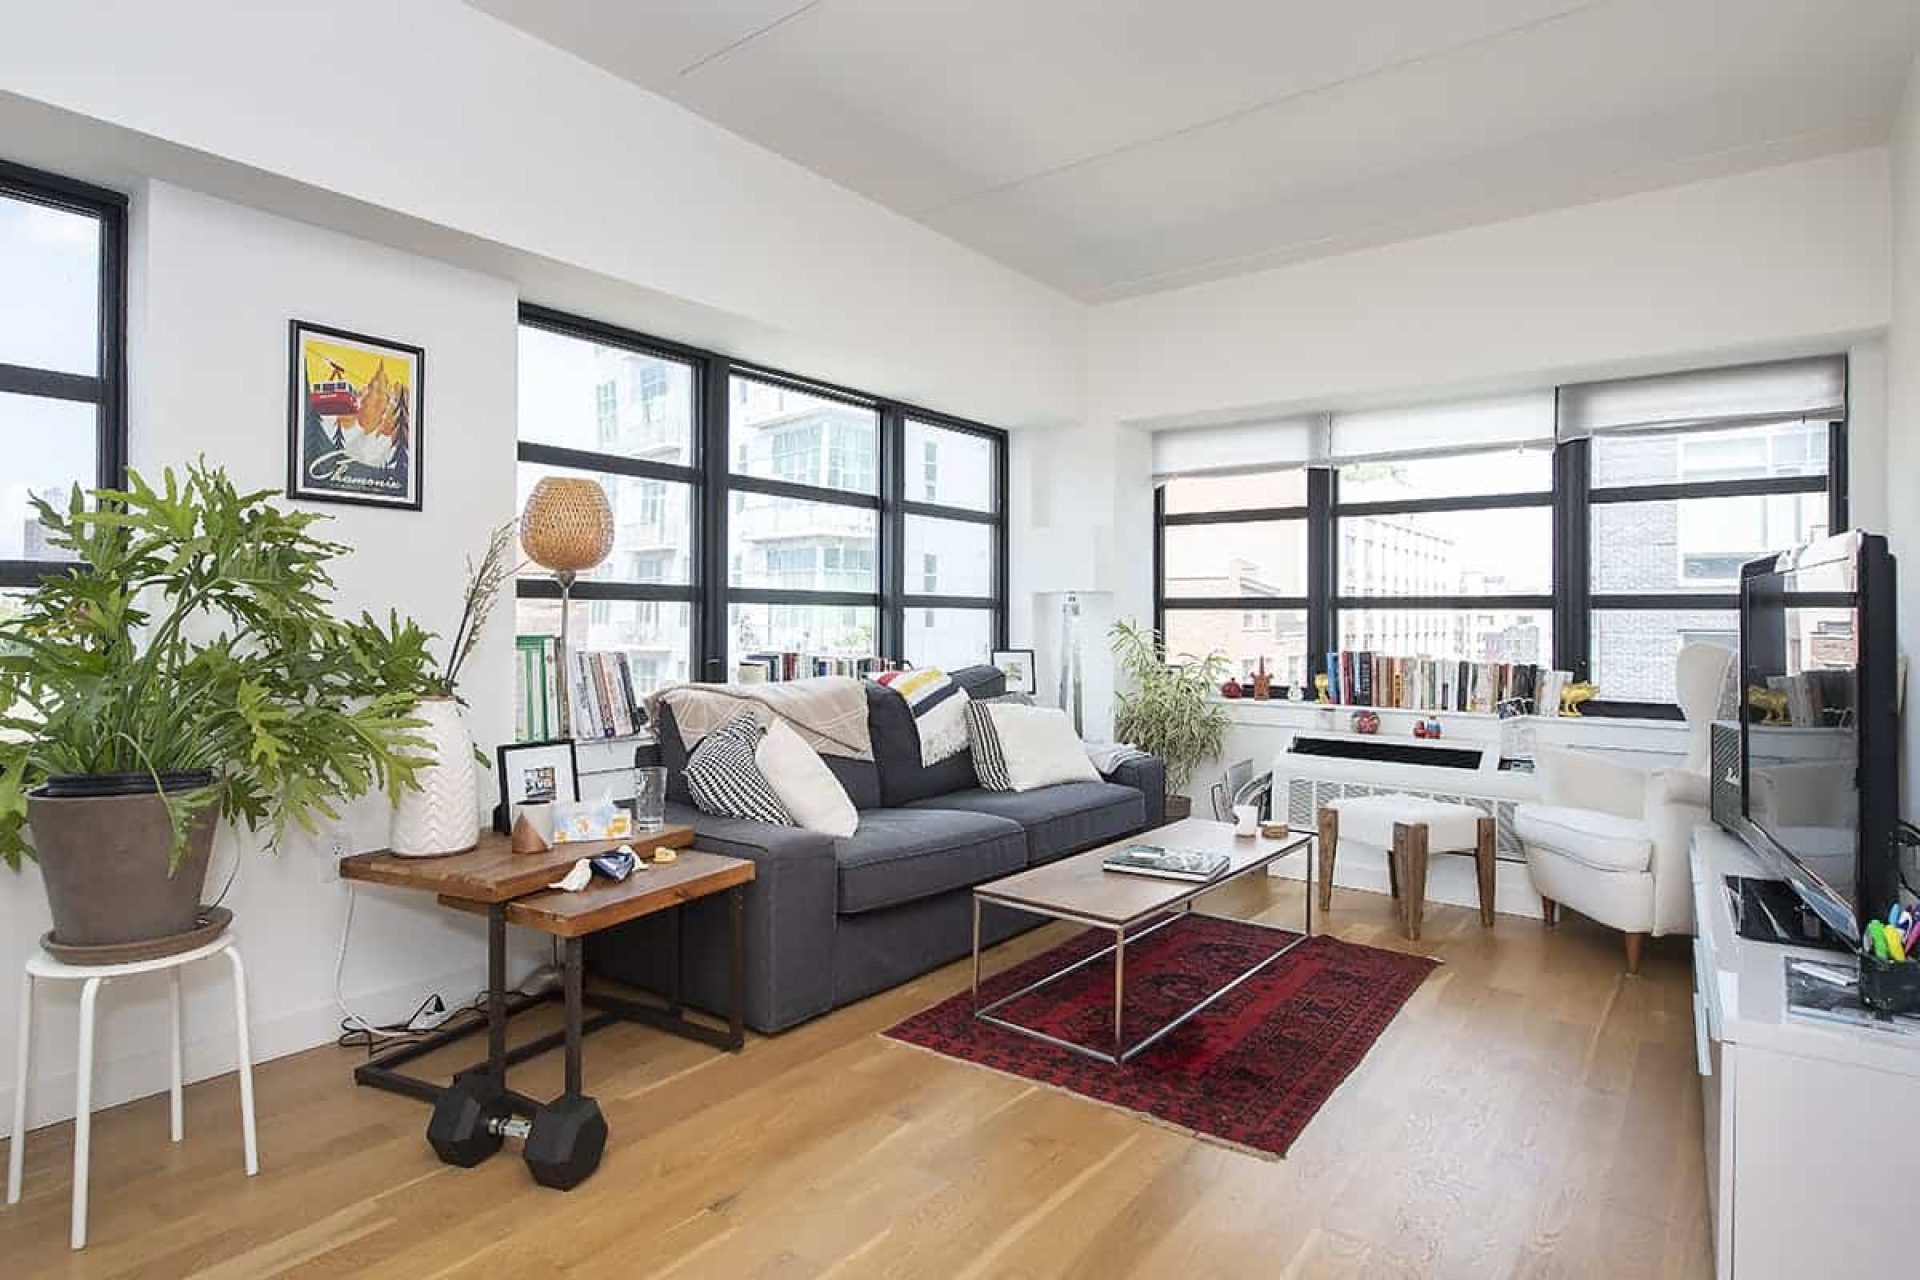 Living room at 66 Ainslie Street apartments in Brooklyn with large windows, a couch with matching tables and hardwood floors.